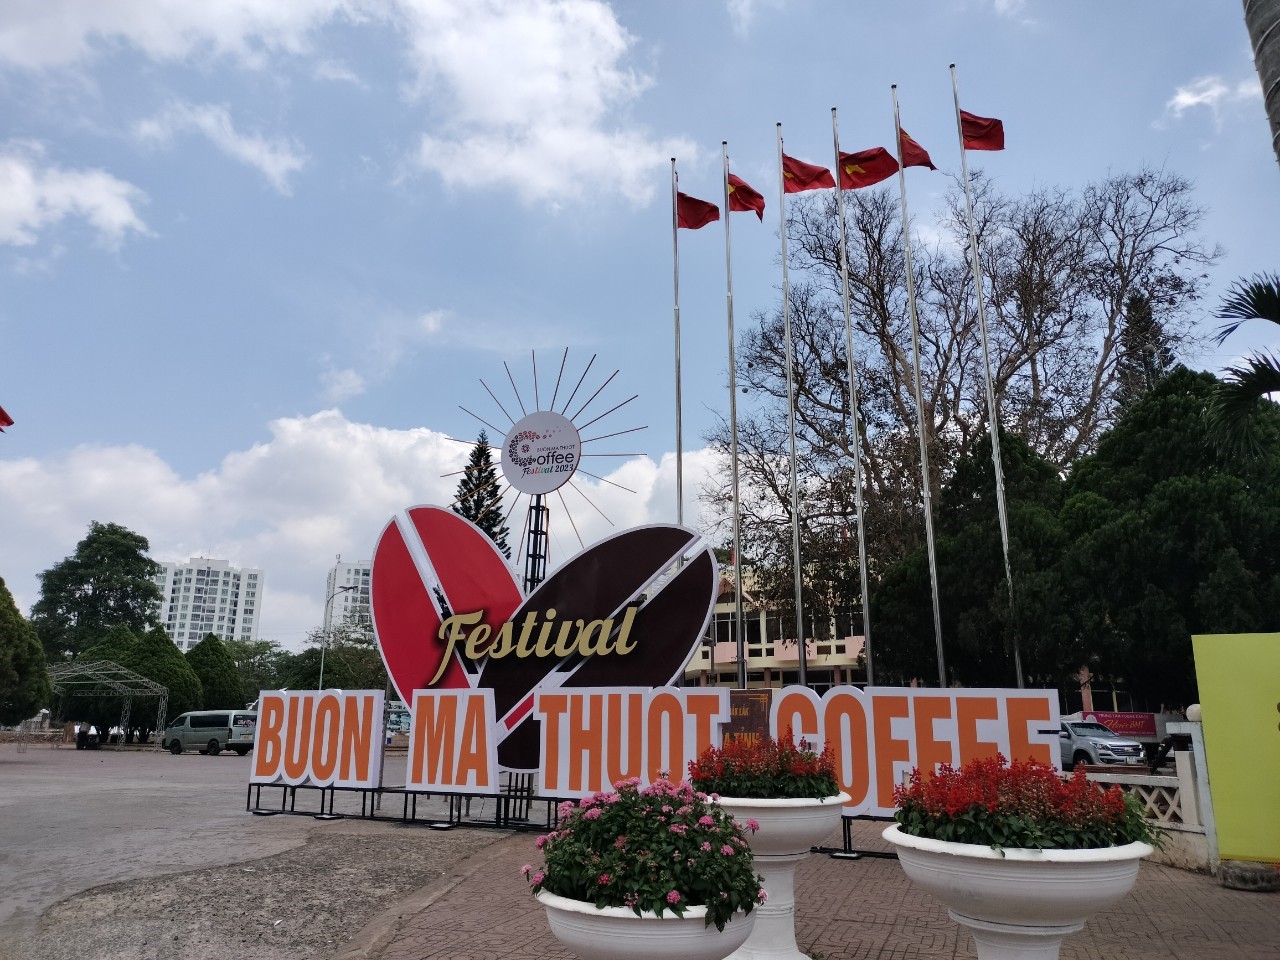 Buon Ma Thuot City resolved to turn it into a “Civilized – Friendly – Hospitable Destination” during the 8th Buon Ma Thuot Coffee Festival in 2023